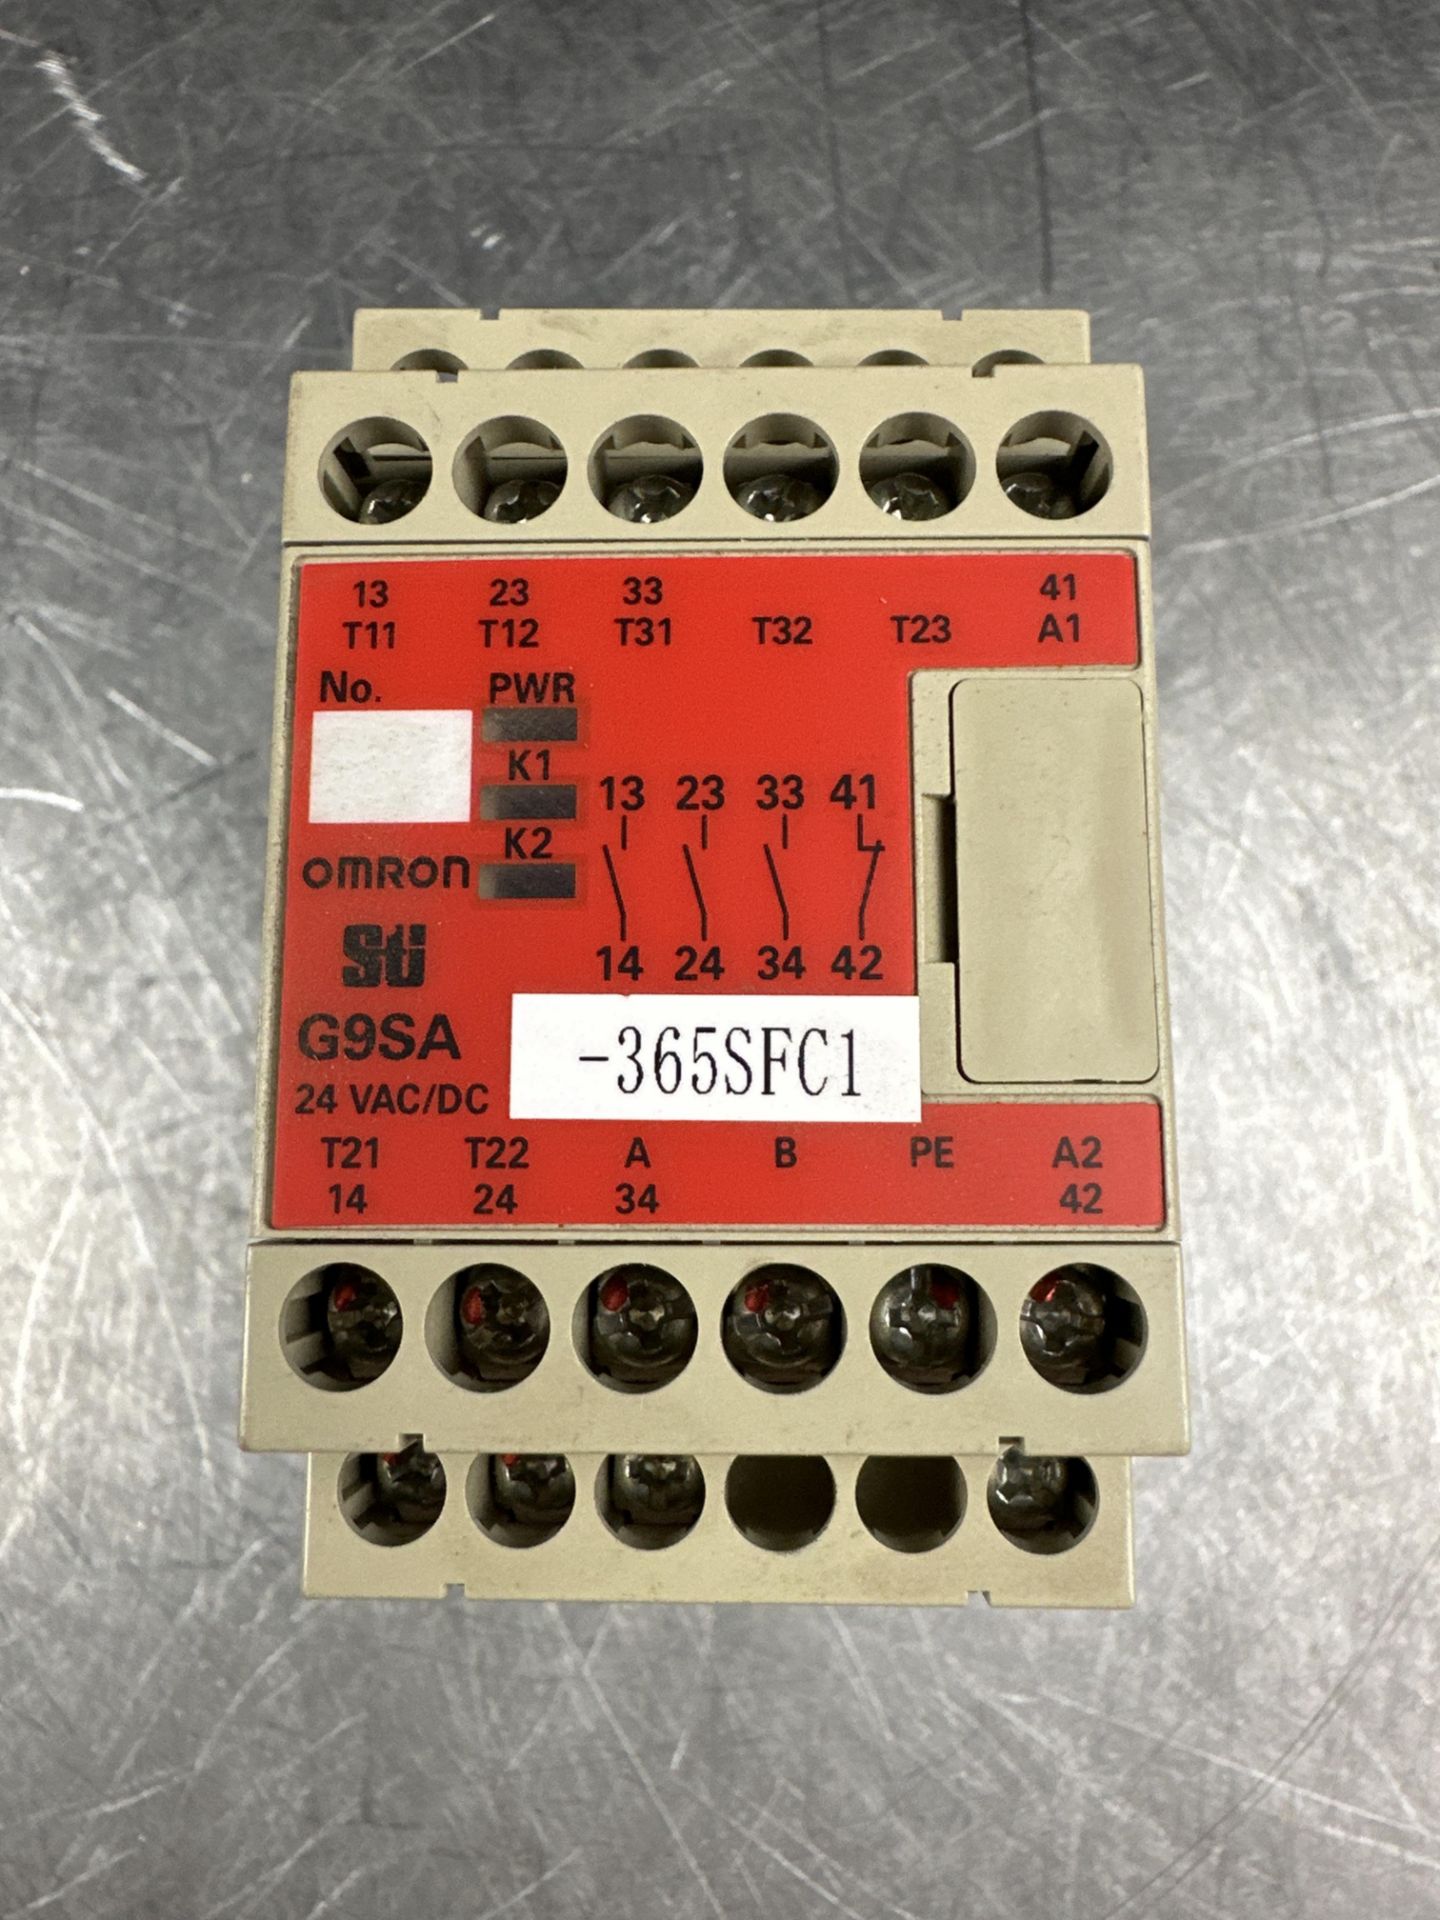 LOT OF 4 OMRON G9SA-301 SAFETY RELAYS - Image 4 of 6